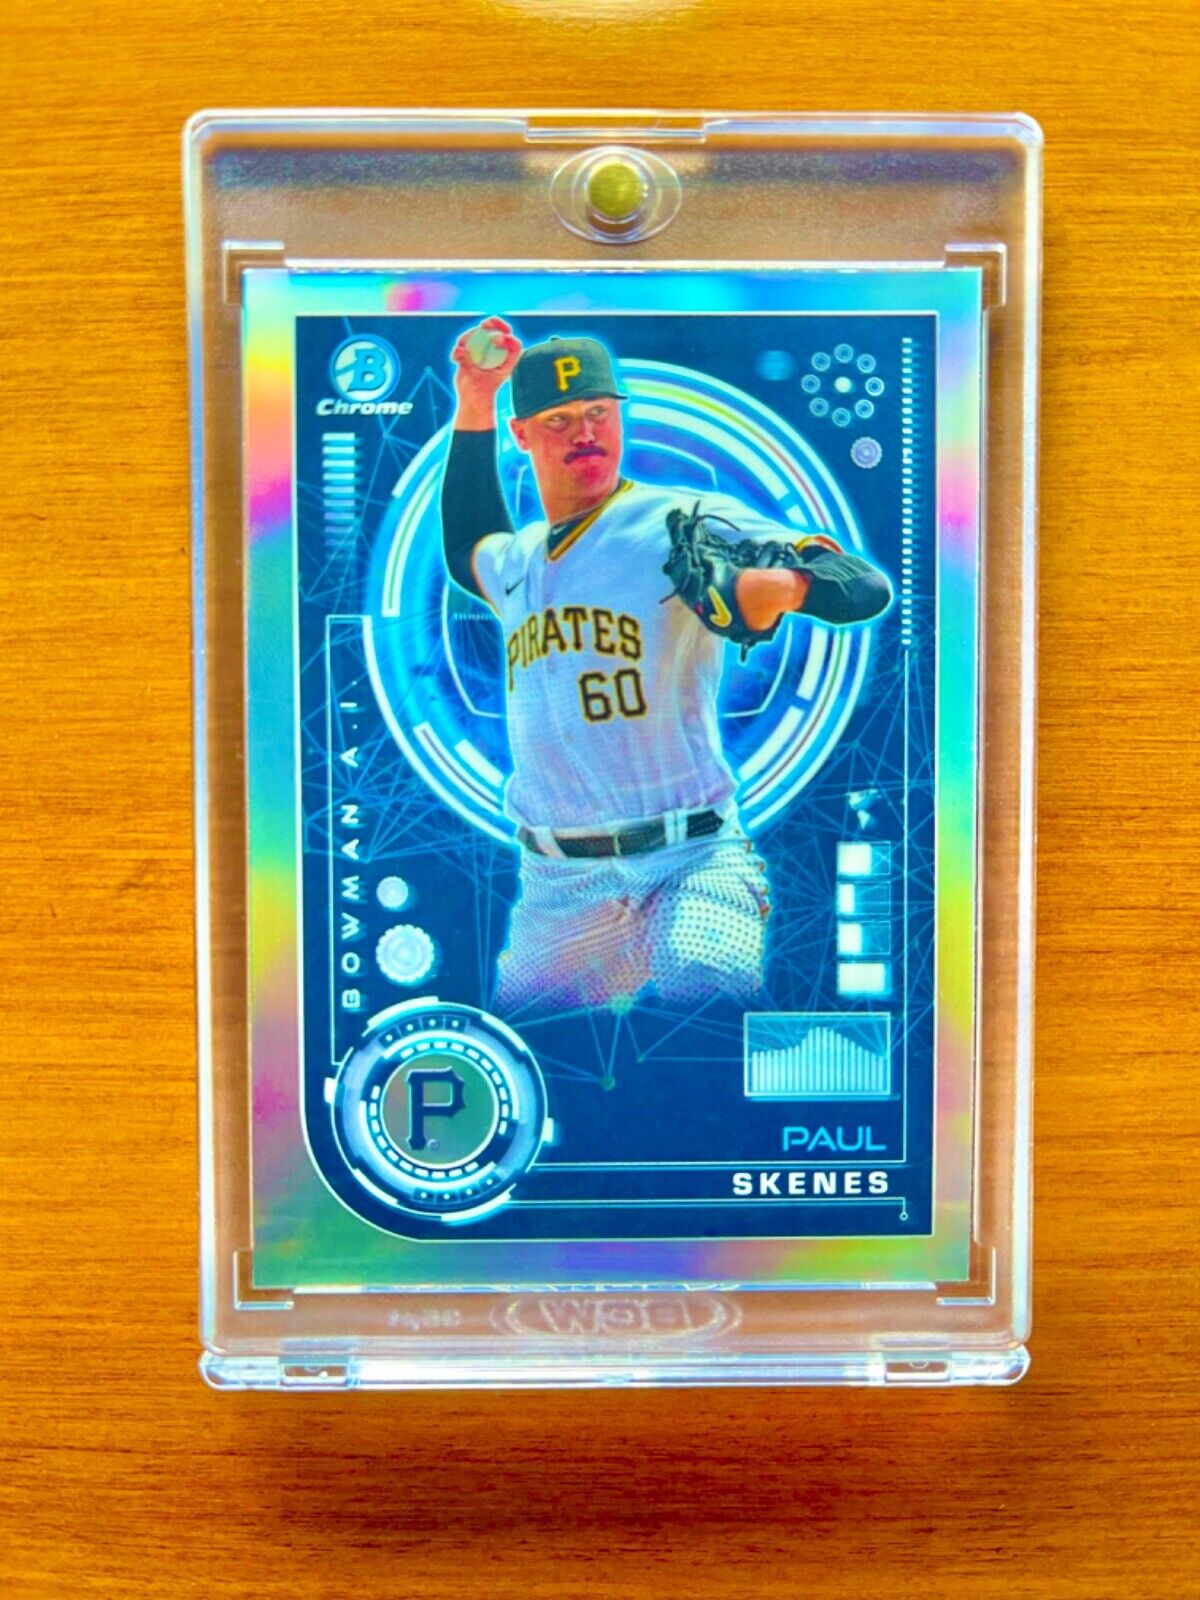 Paul Skenes RARE ROOKIE REFRACTOR BOWMAN CHROME INVESTMENT CARD SSP PIRATES MINT